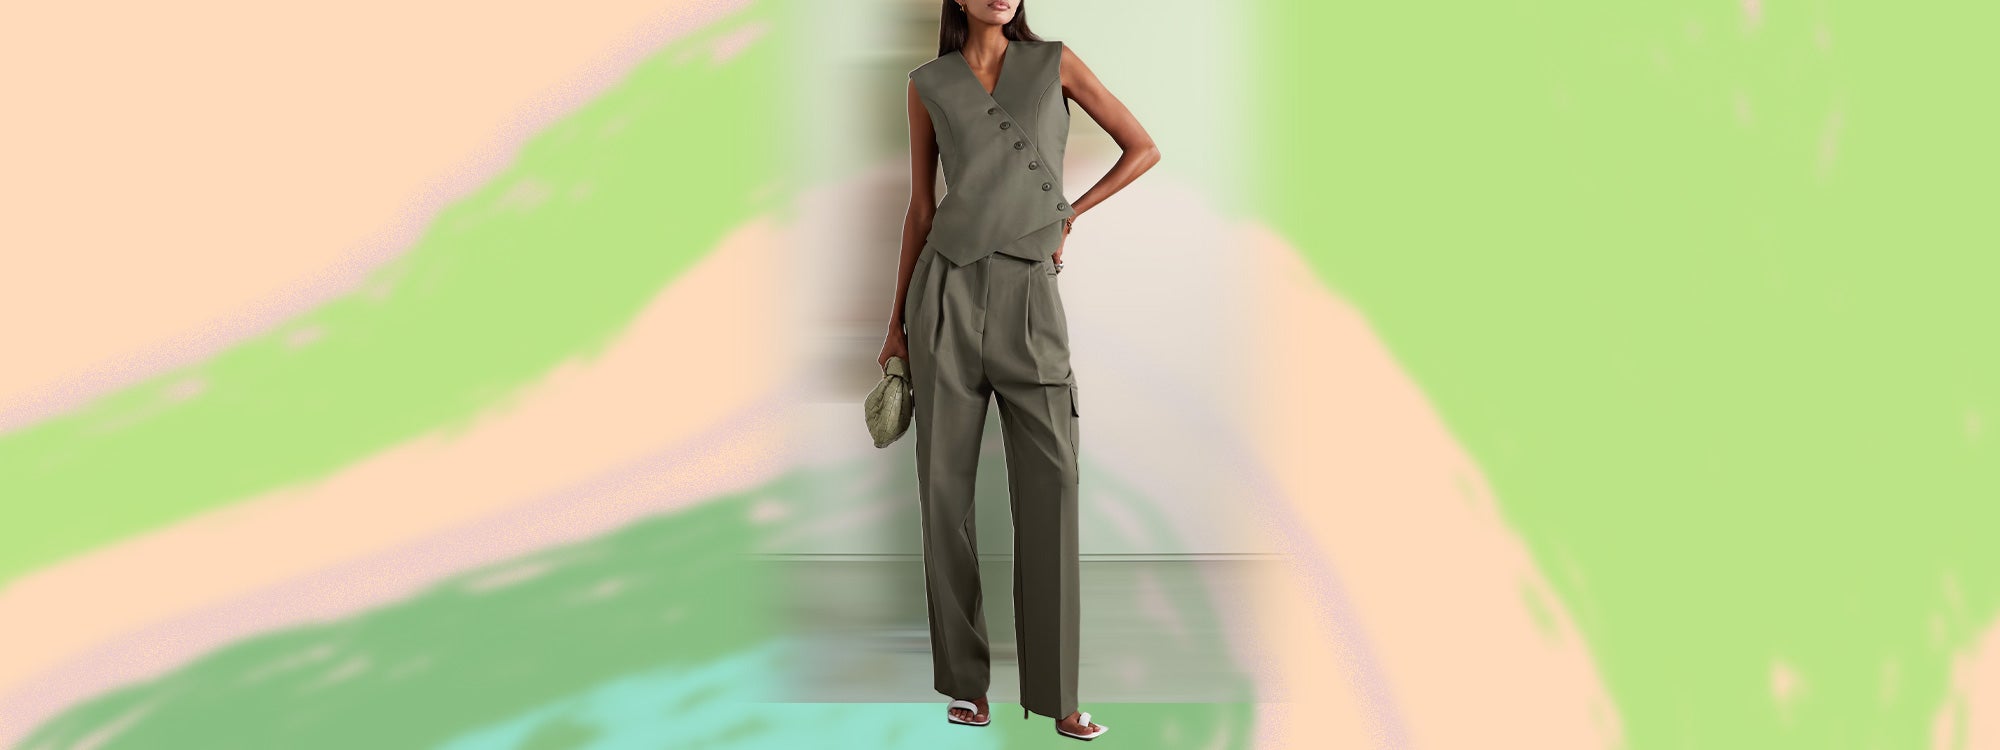 Hey Fancy Pants Here's 10 Dressy Pant Suits For Your Consideration | Ideias  fashion, Moda, Roupas